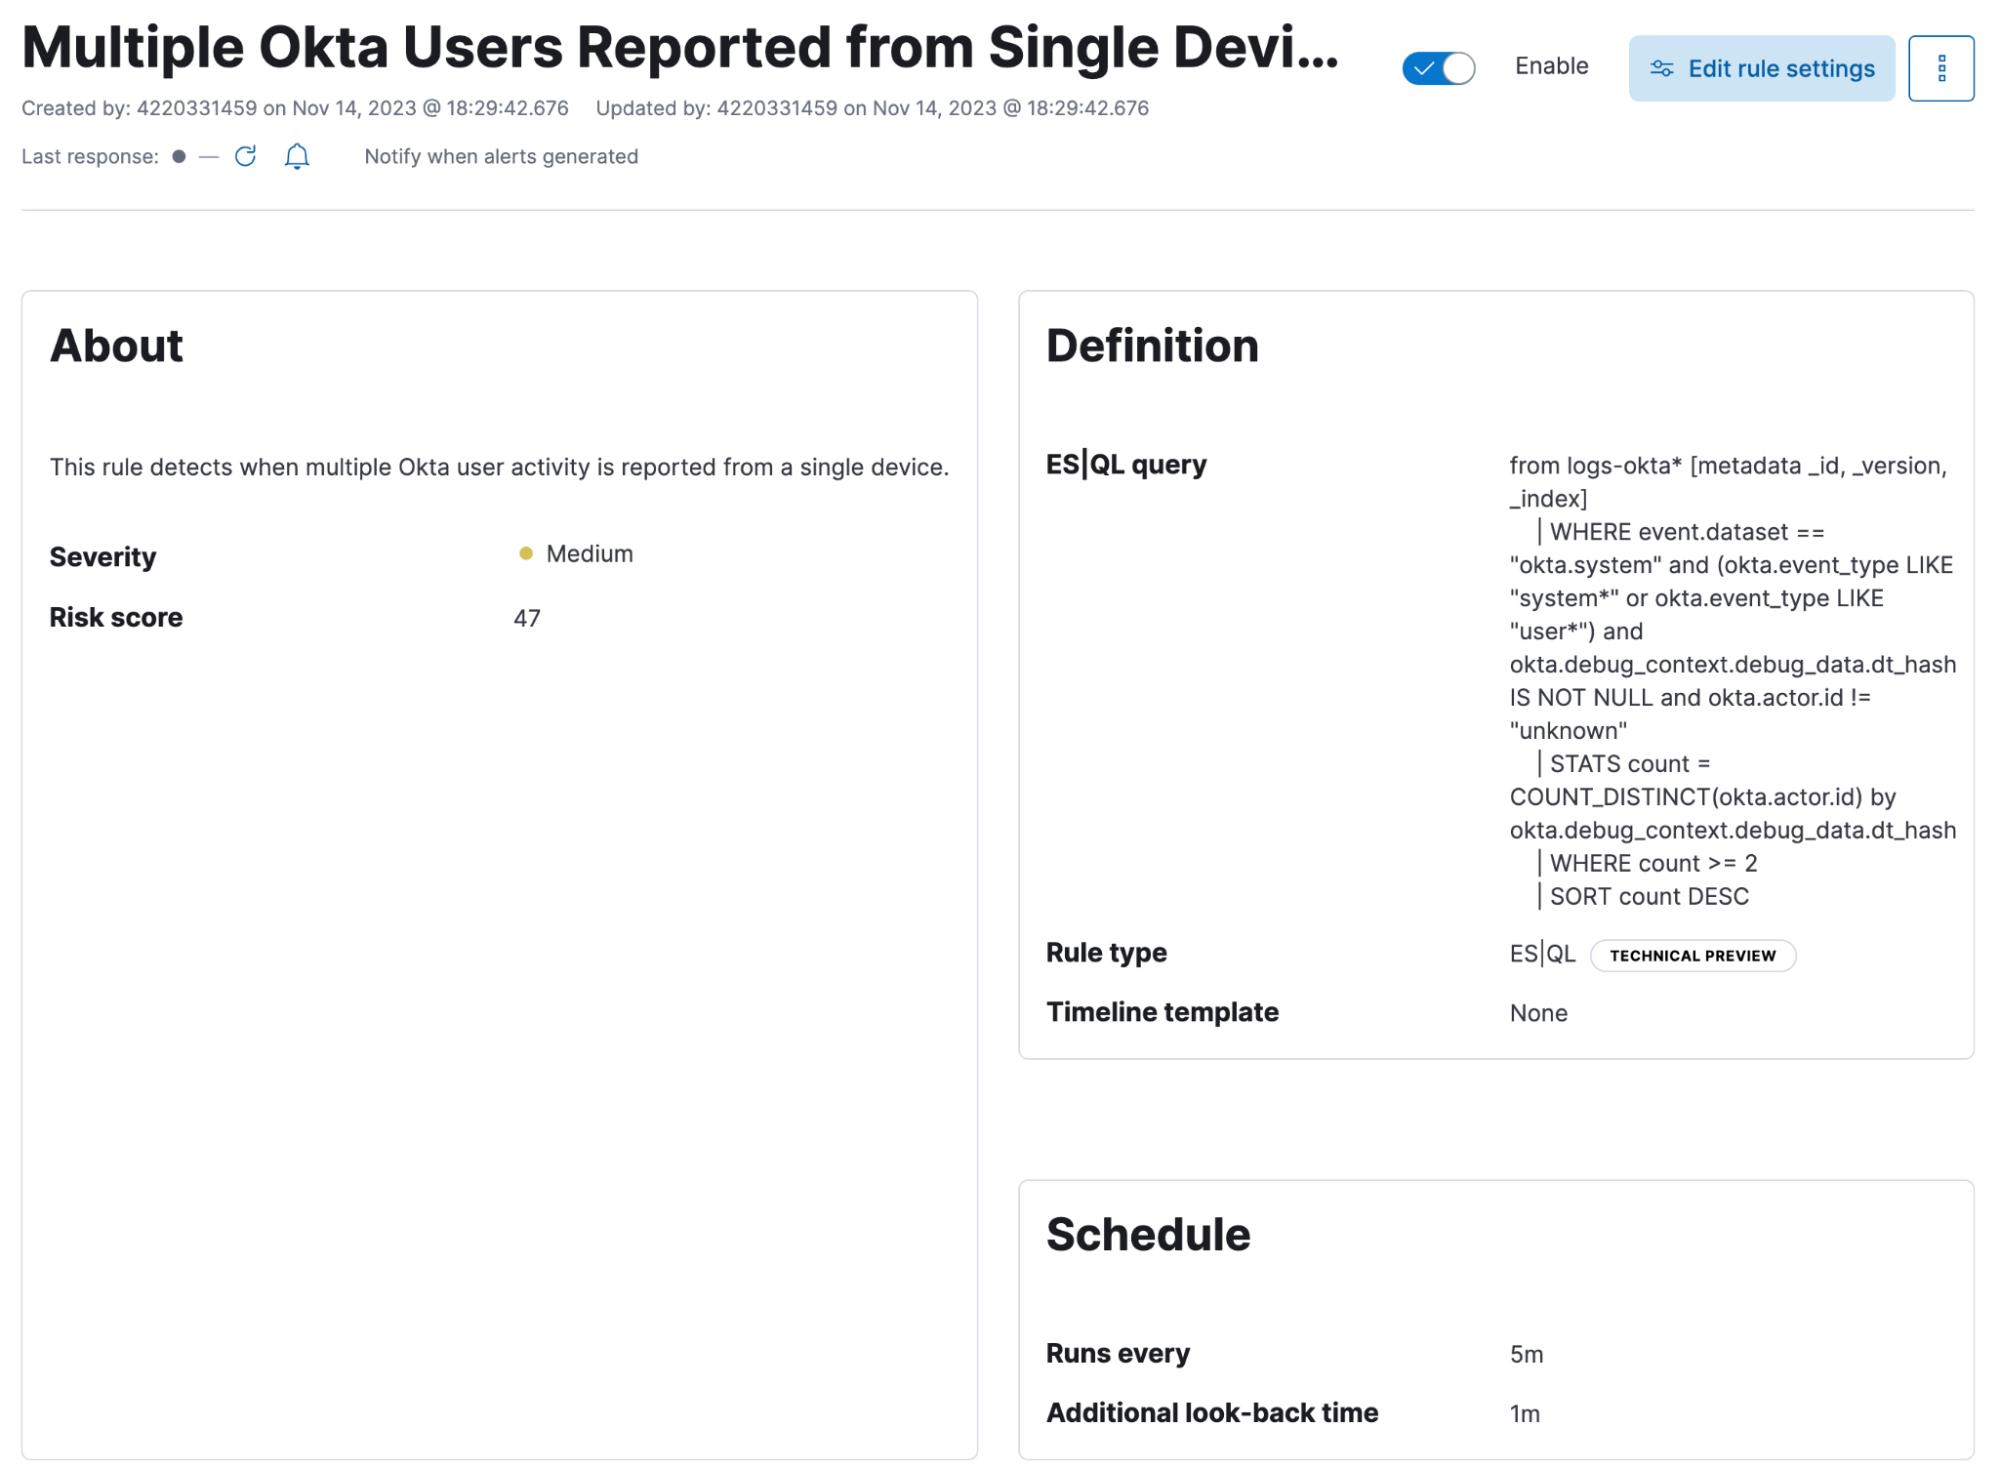 Enabled custom detection rule with ES|QL query for Okta threat